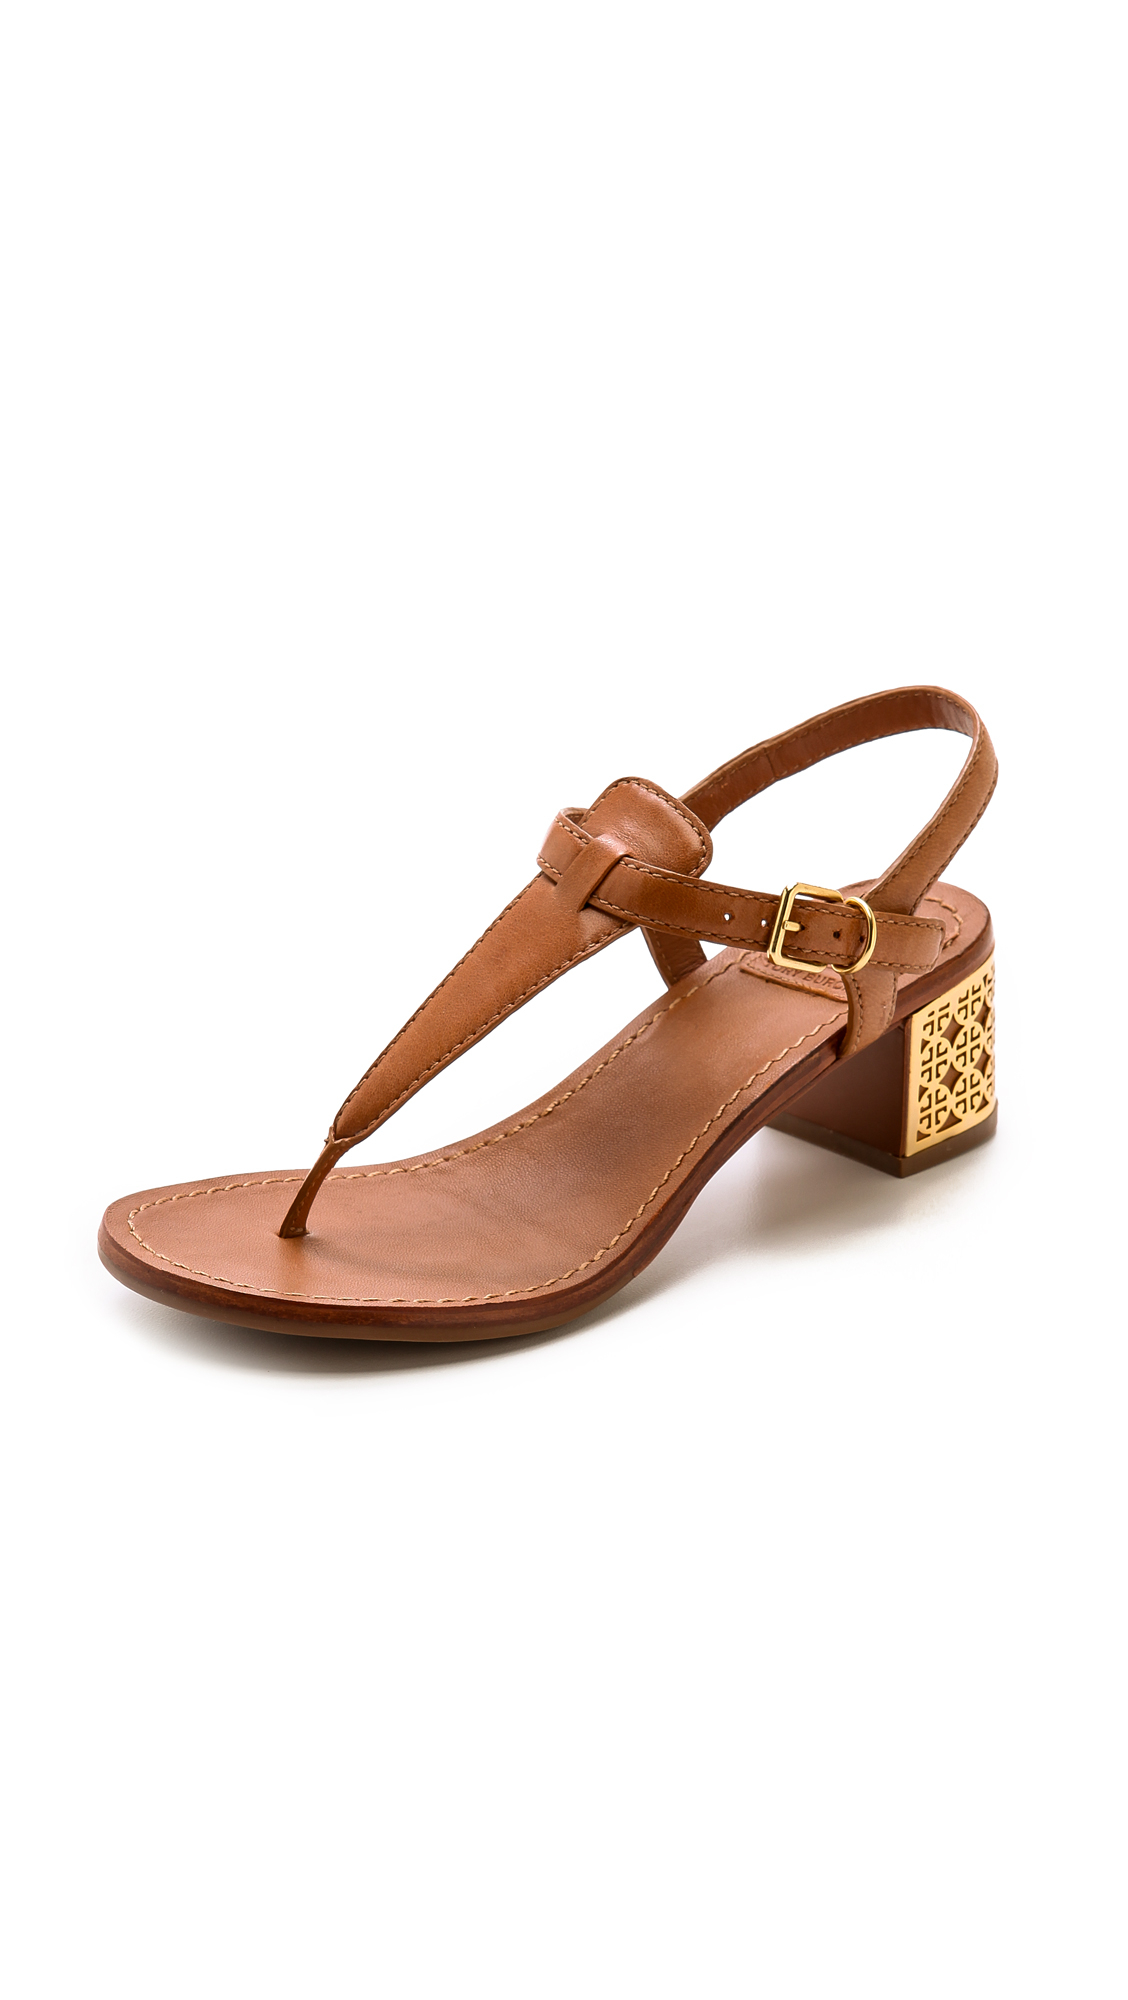 Tory Burch Audra Sandals in Brown | Lyst